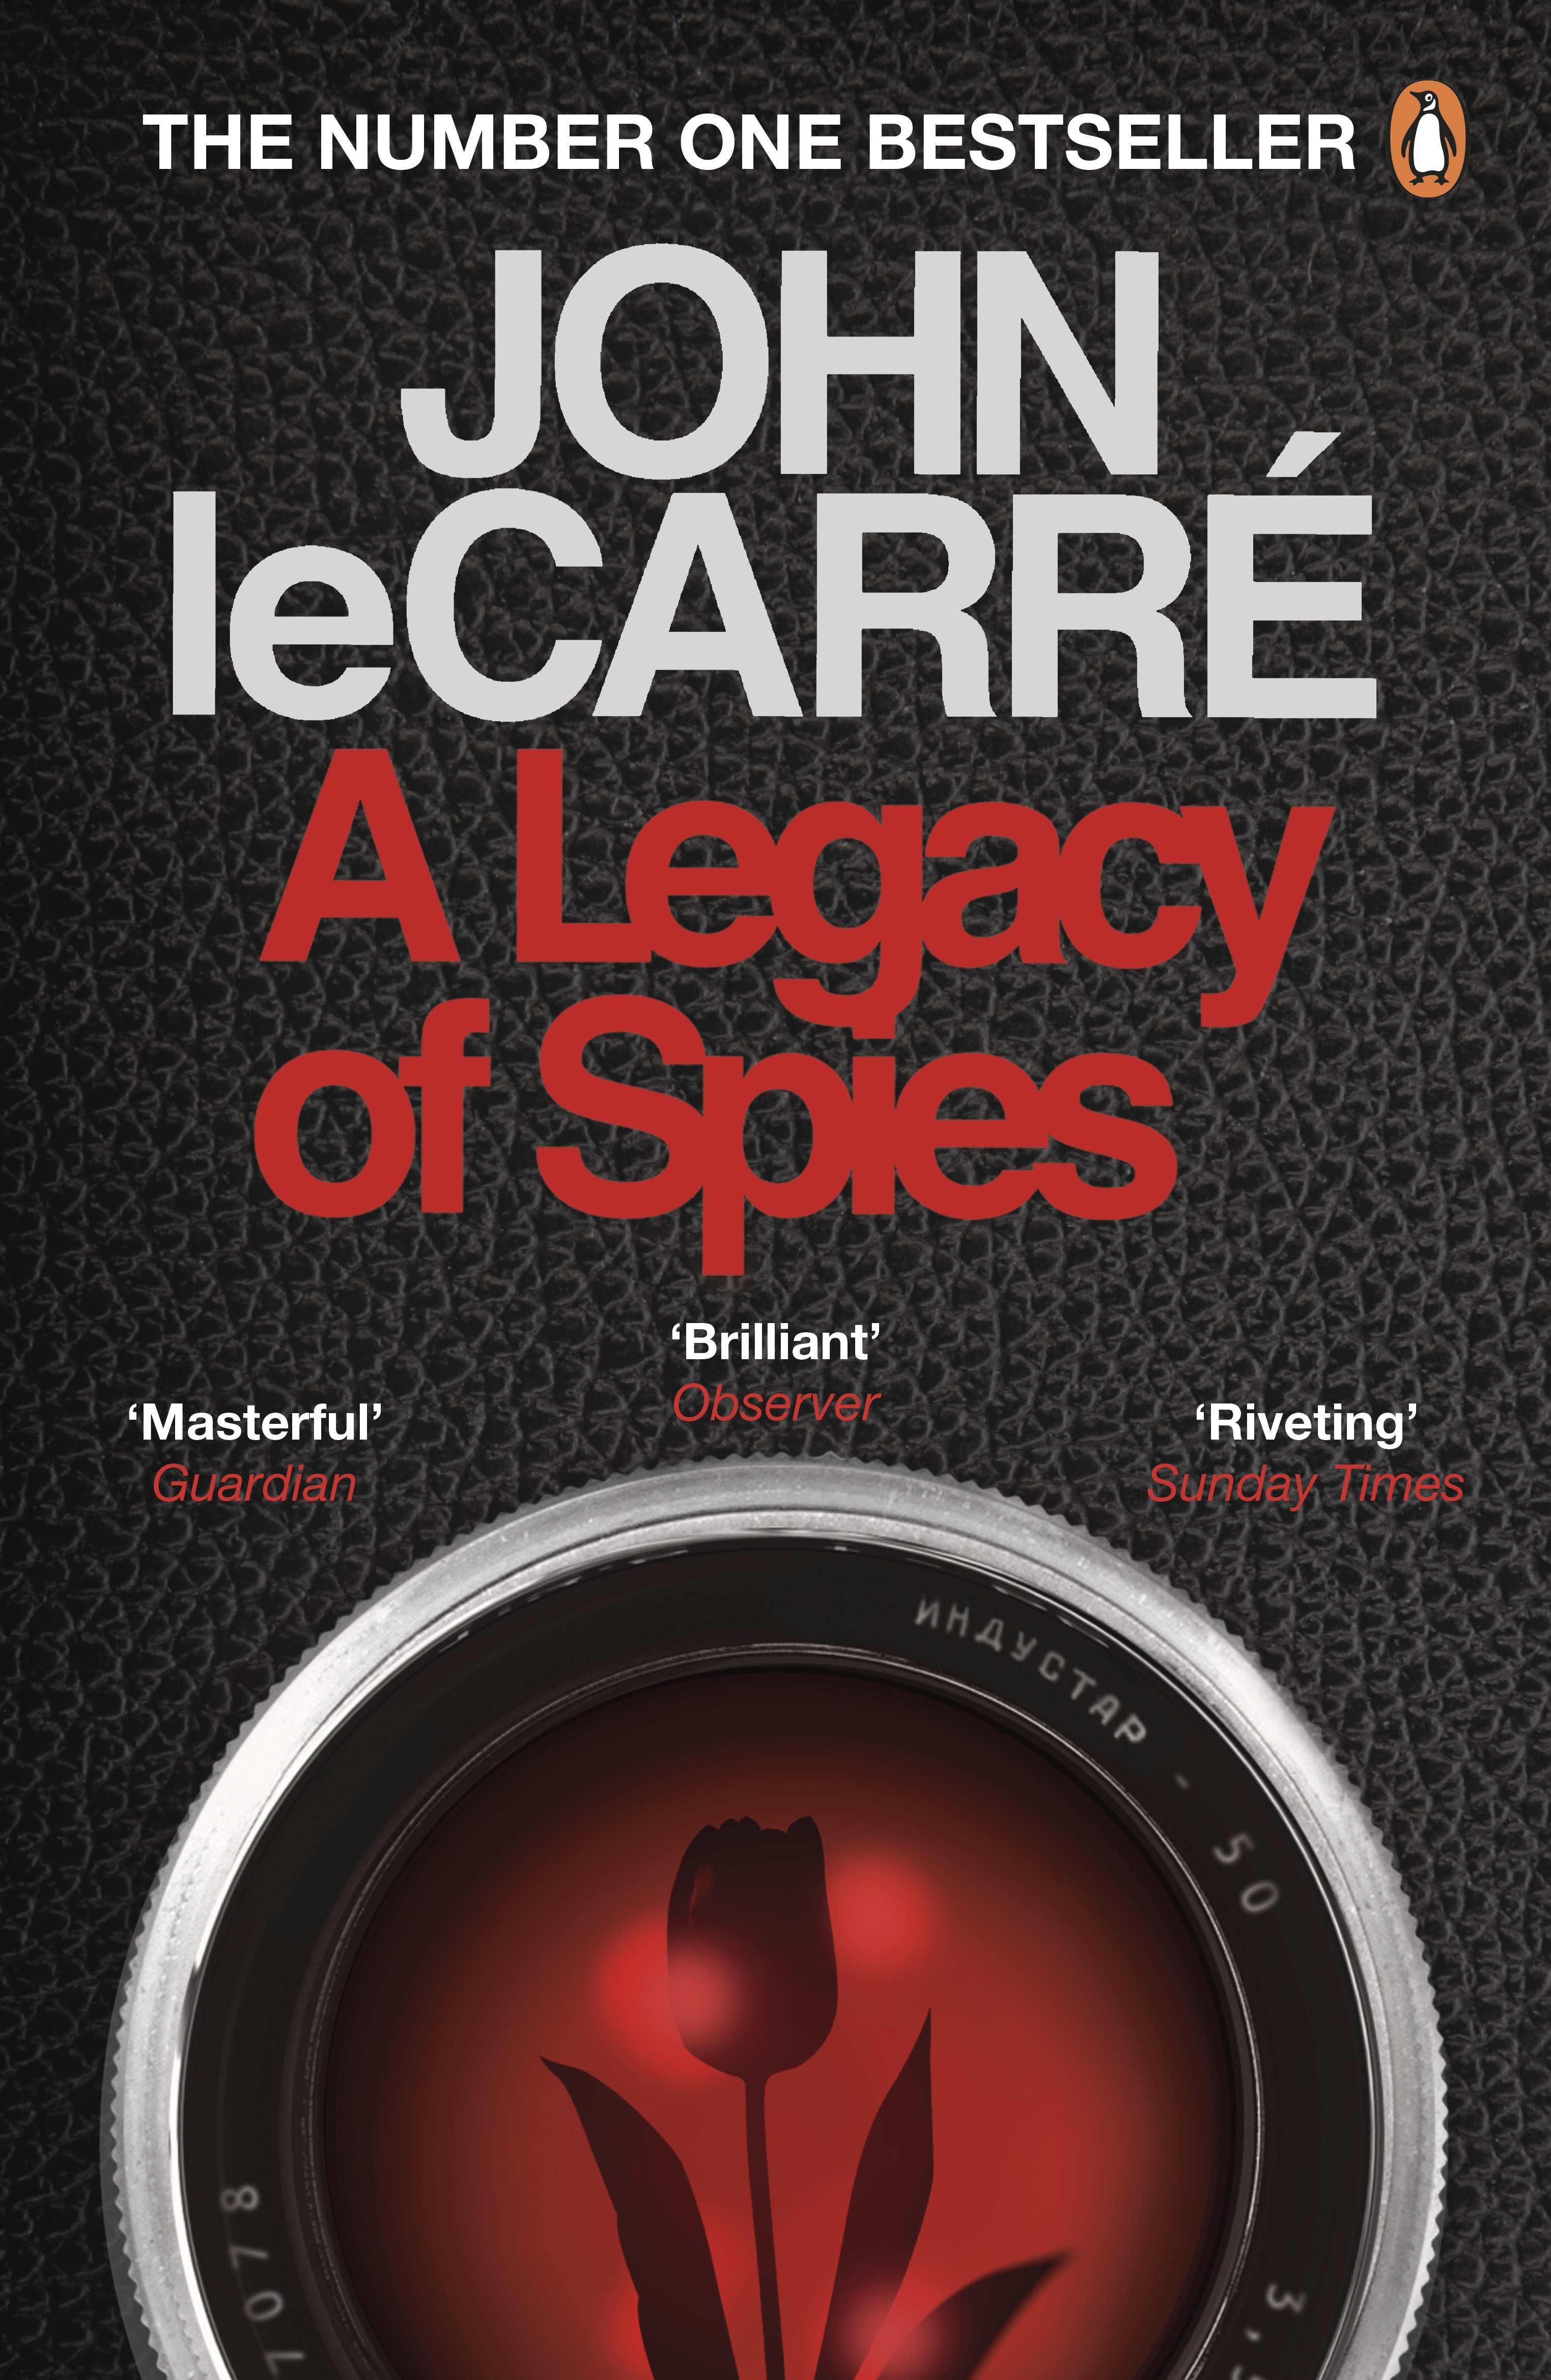 Book “A Legacy of Spies” by John le Carré — May 3, 2018